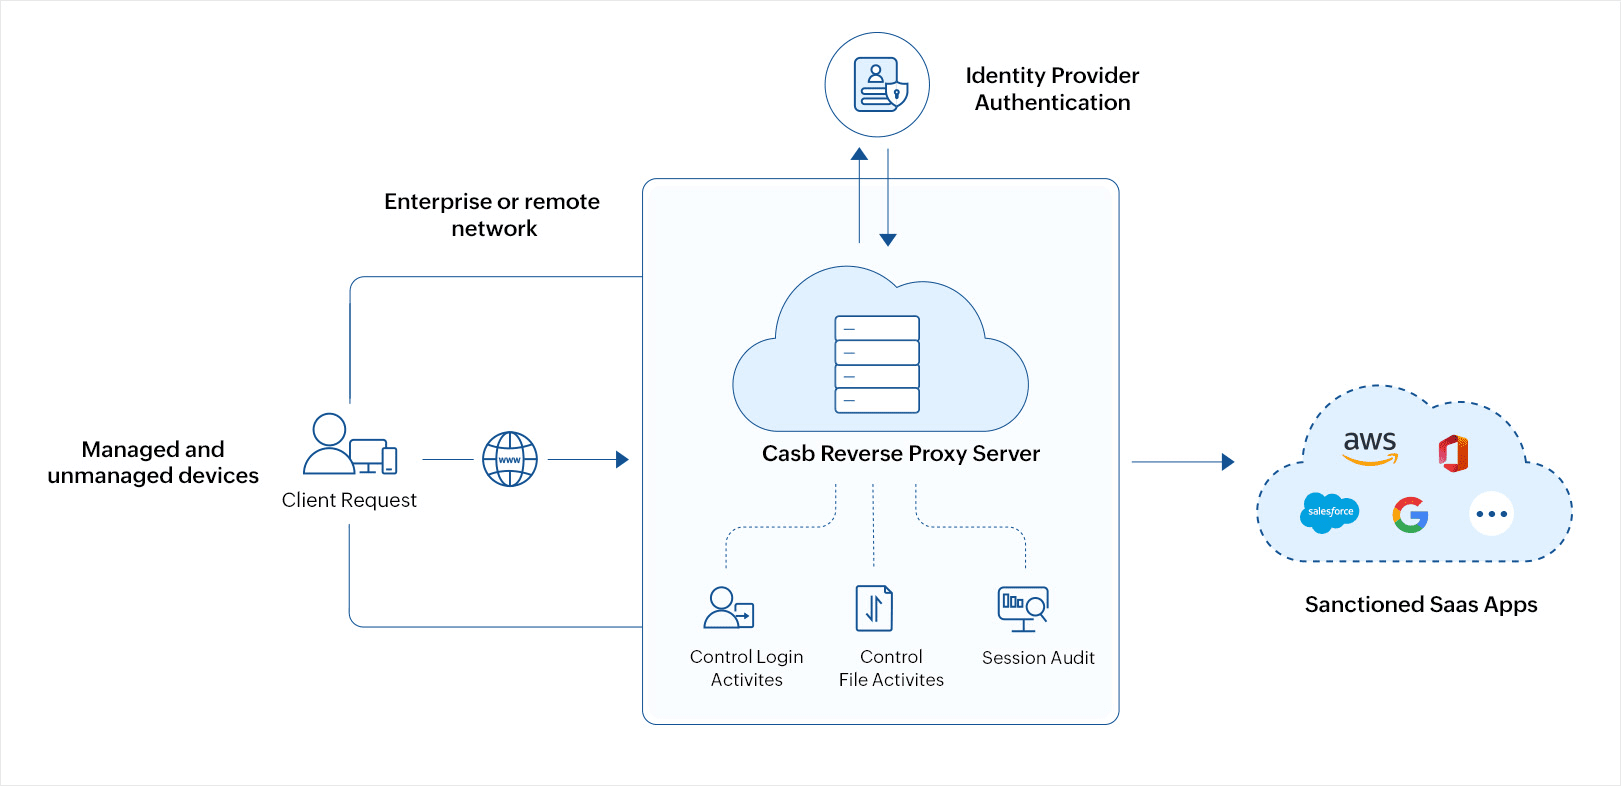 Reverse proxy CASB architecture uses Identity provider authentication service to redirect incoming traffic to CASB reverse proxy server (CRPS) to monitor user activity and enforce policies